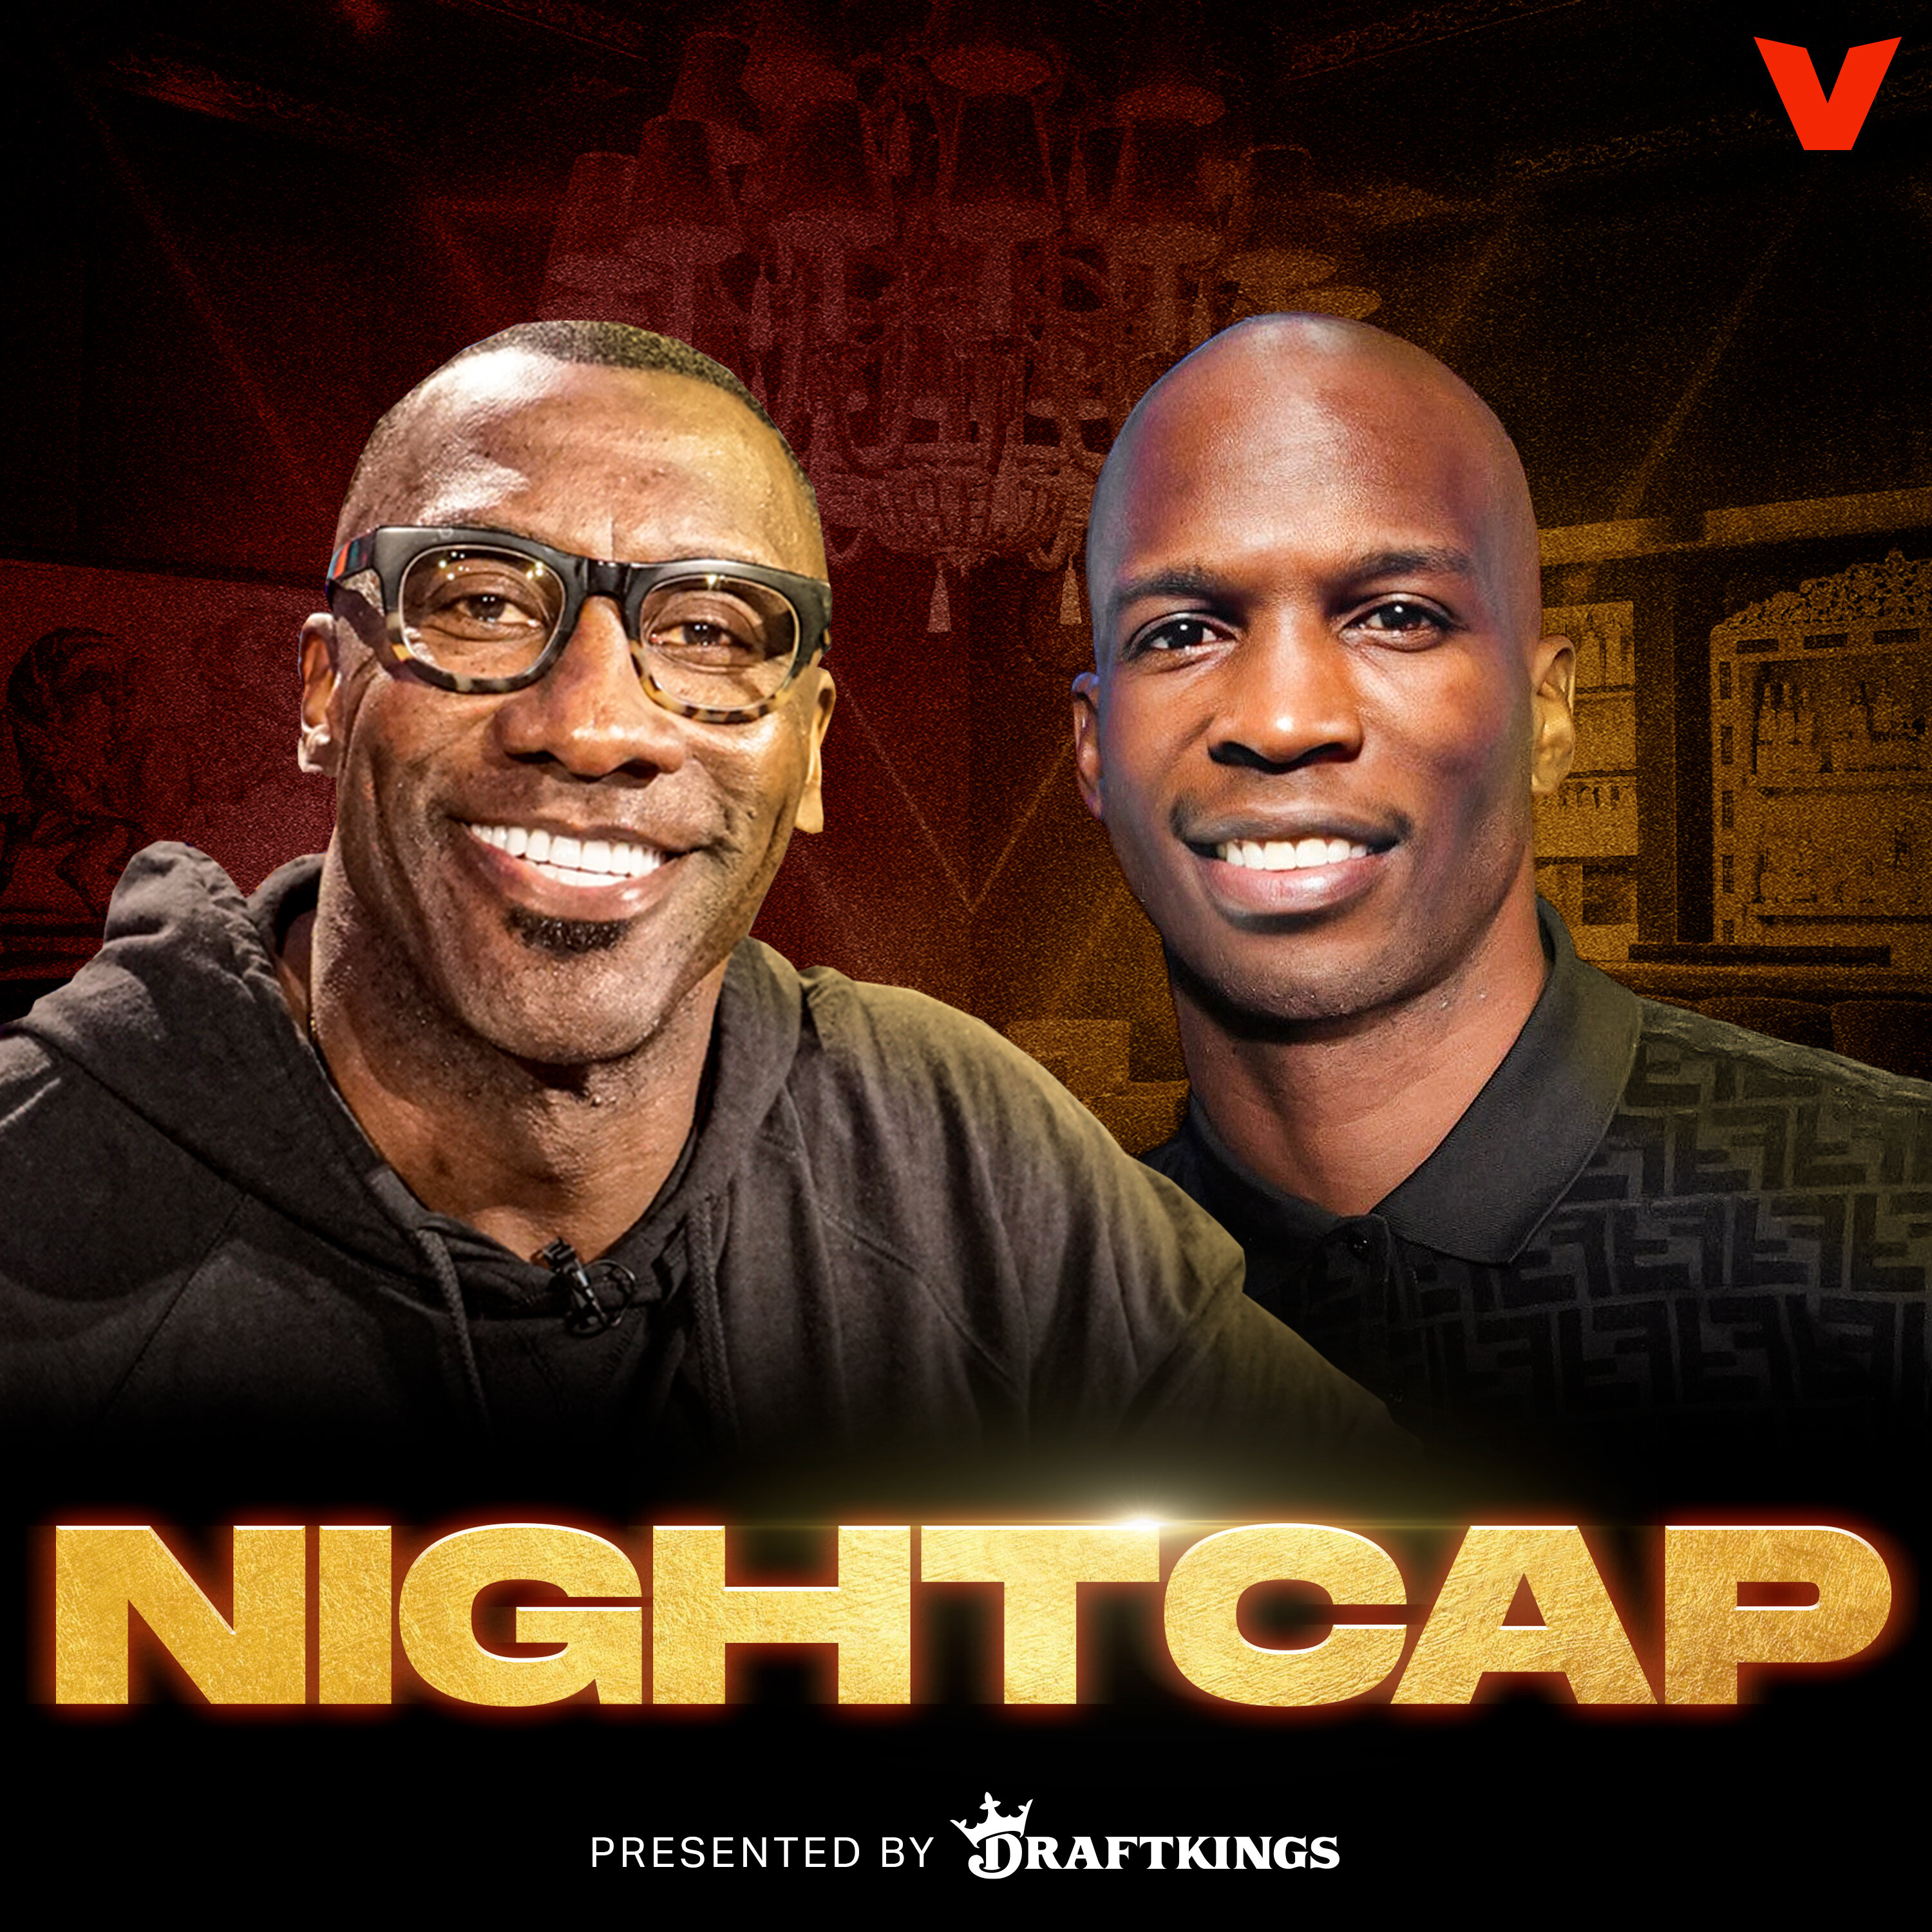 Nightcap - Lakers Dominate, Marvin Harrison's Decision, Dogs In the Bed